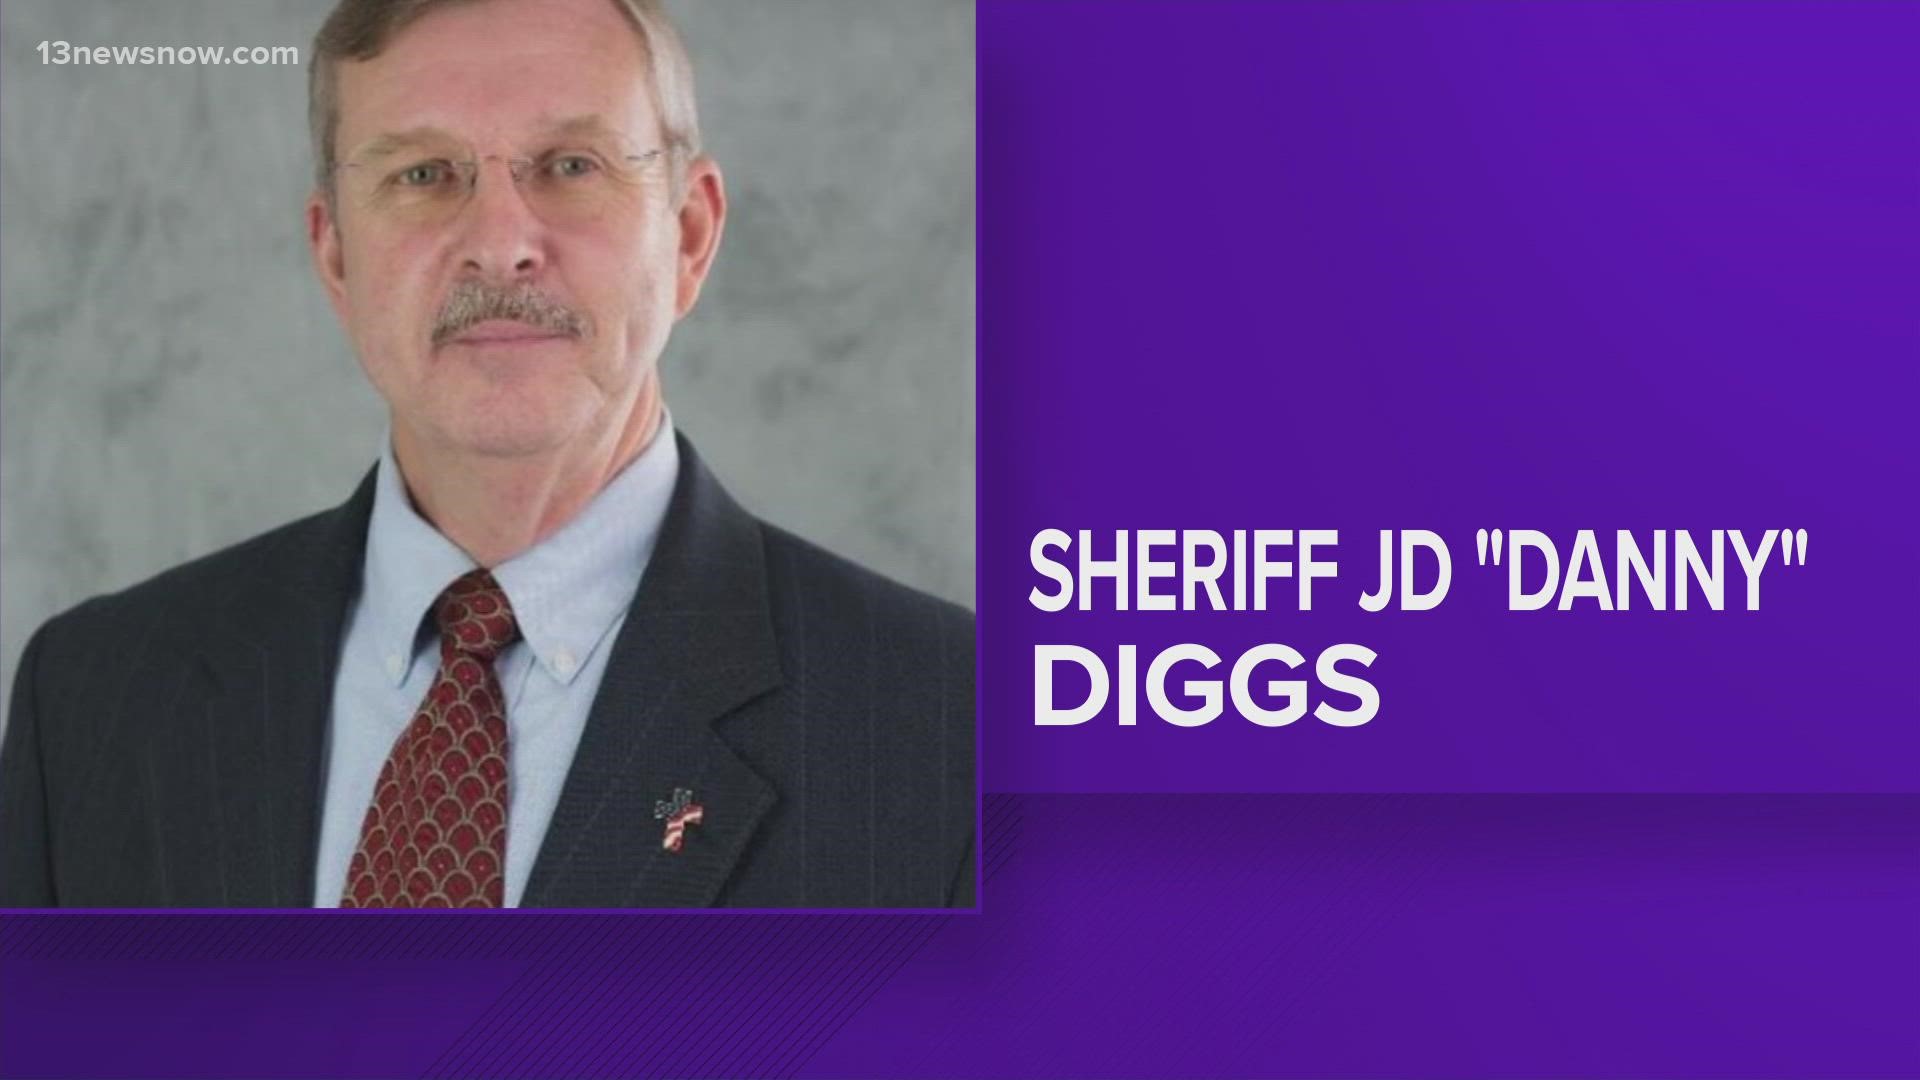 York-Poquoson Sheriff Danny Diggs said he is running for Virginia Senate in 2023, hoping to win the seat that will represent the state's redrawn 24th District.